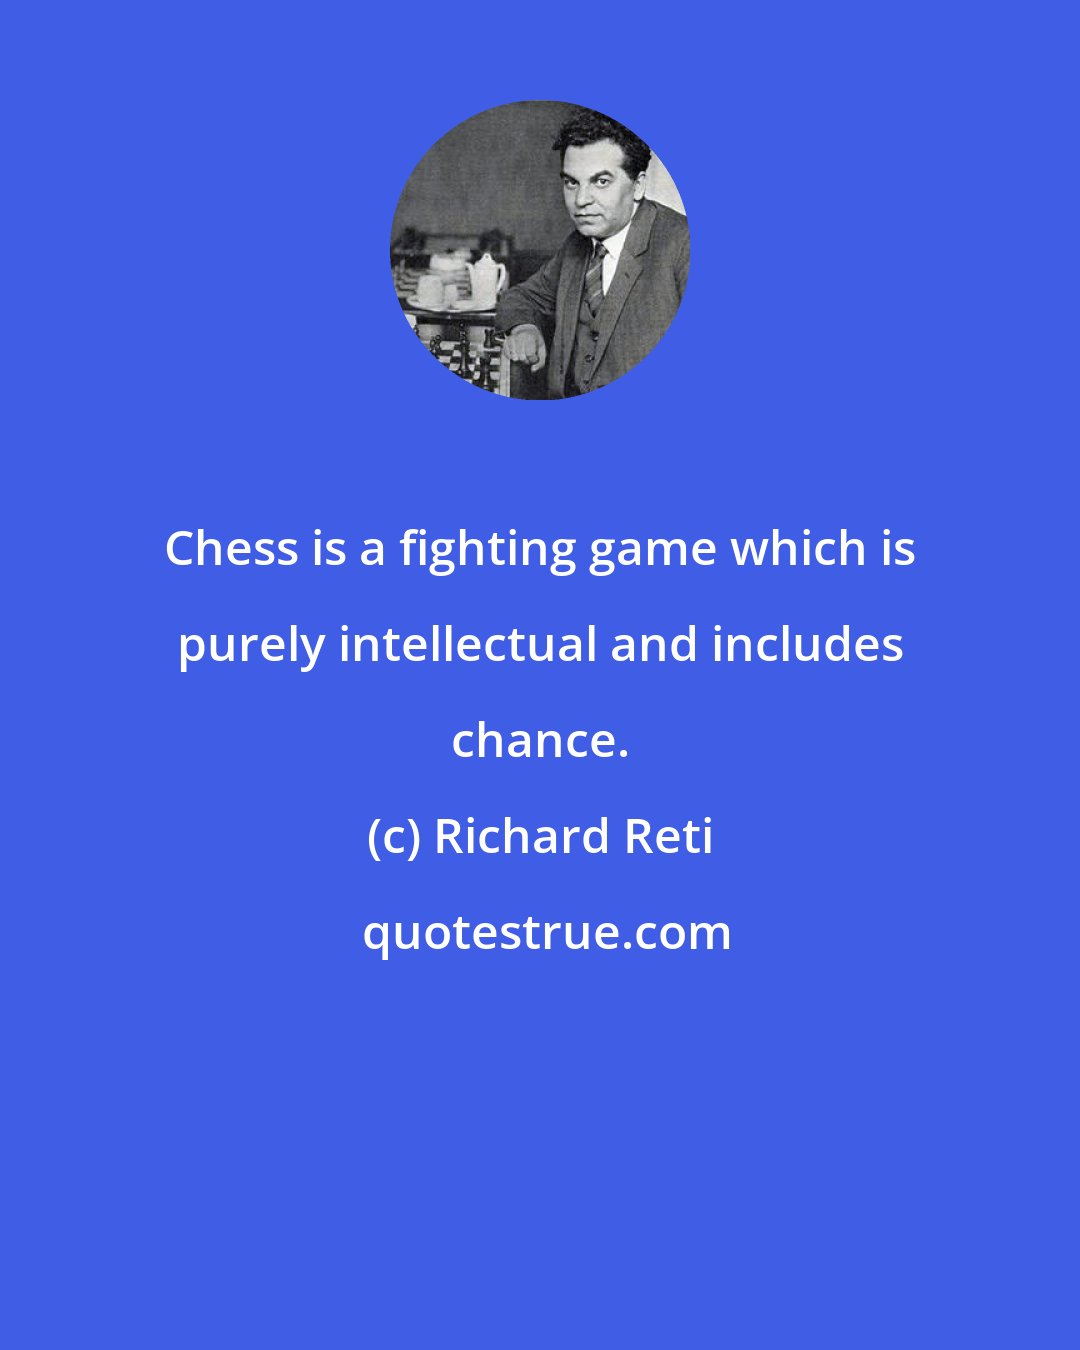 Richard Reti: Chess is a fighting game which is purely intellectual and includes chance.